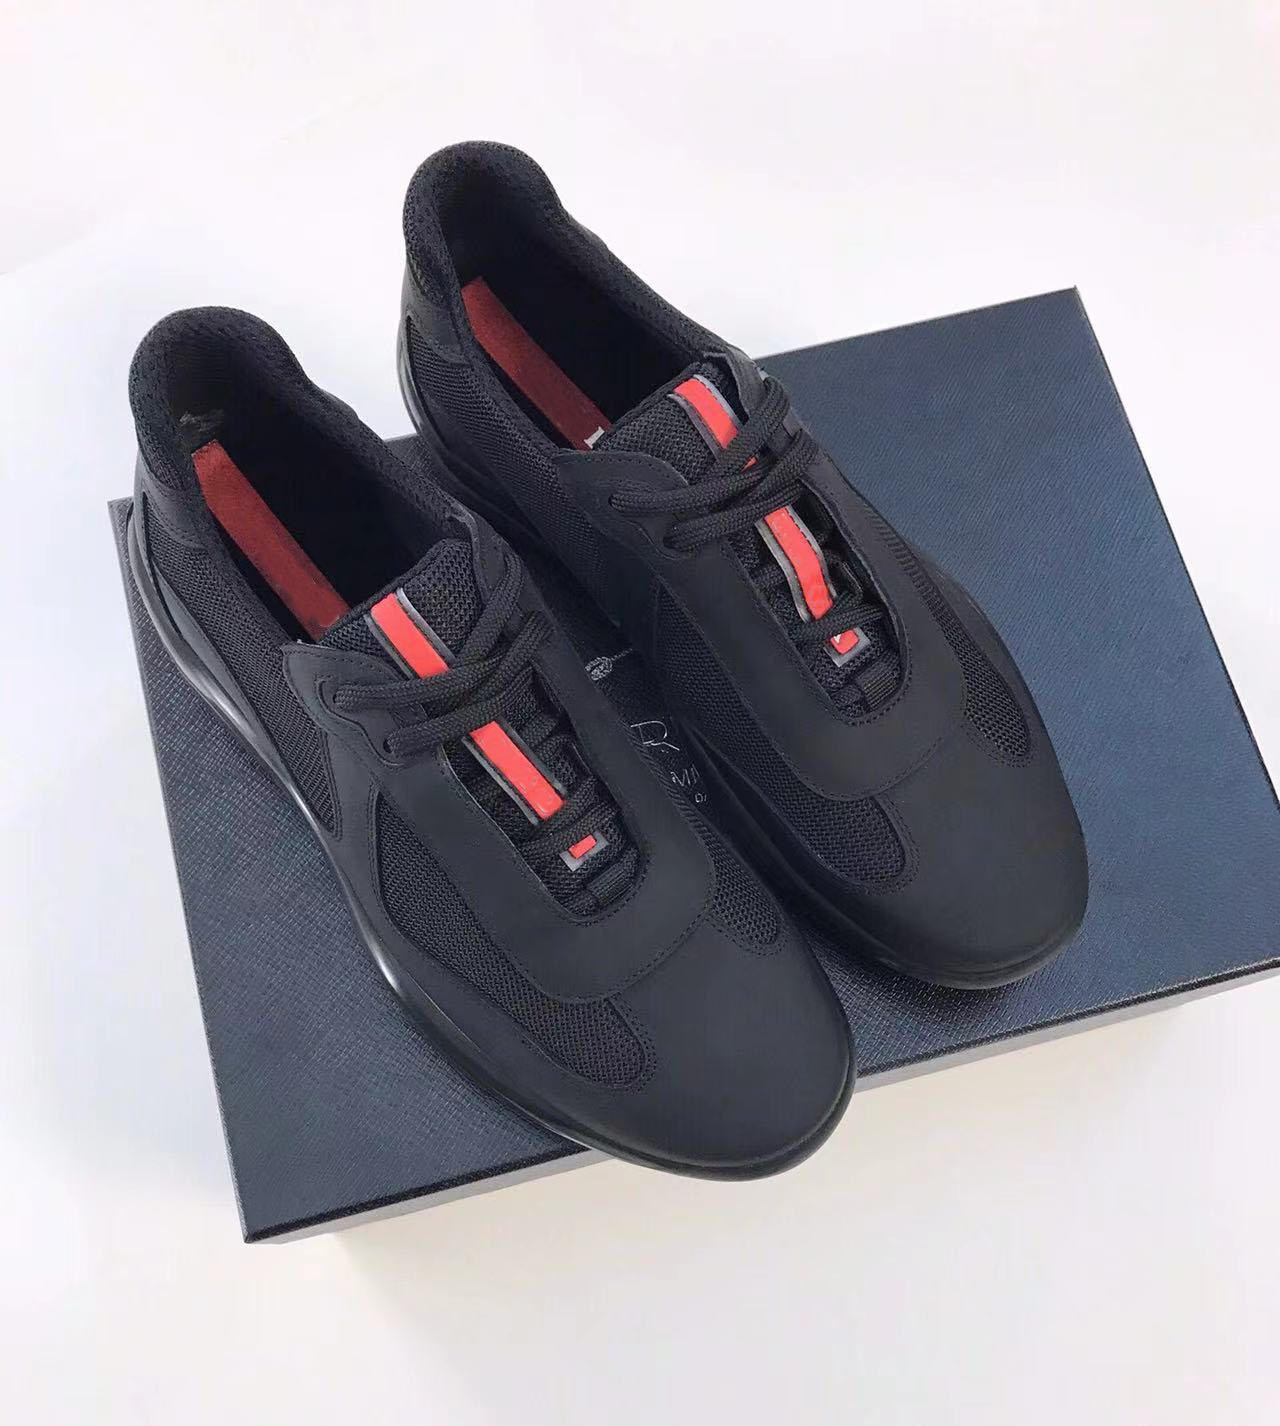 

2022 Perfect Designer Americas Cup Sneakers Shoes Patent Leather & Nylon Luxury Casual Walking Mens Top Quality Runner Sports Outdoor Trainers with box